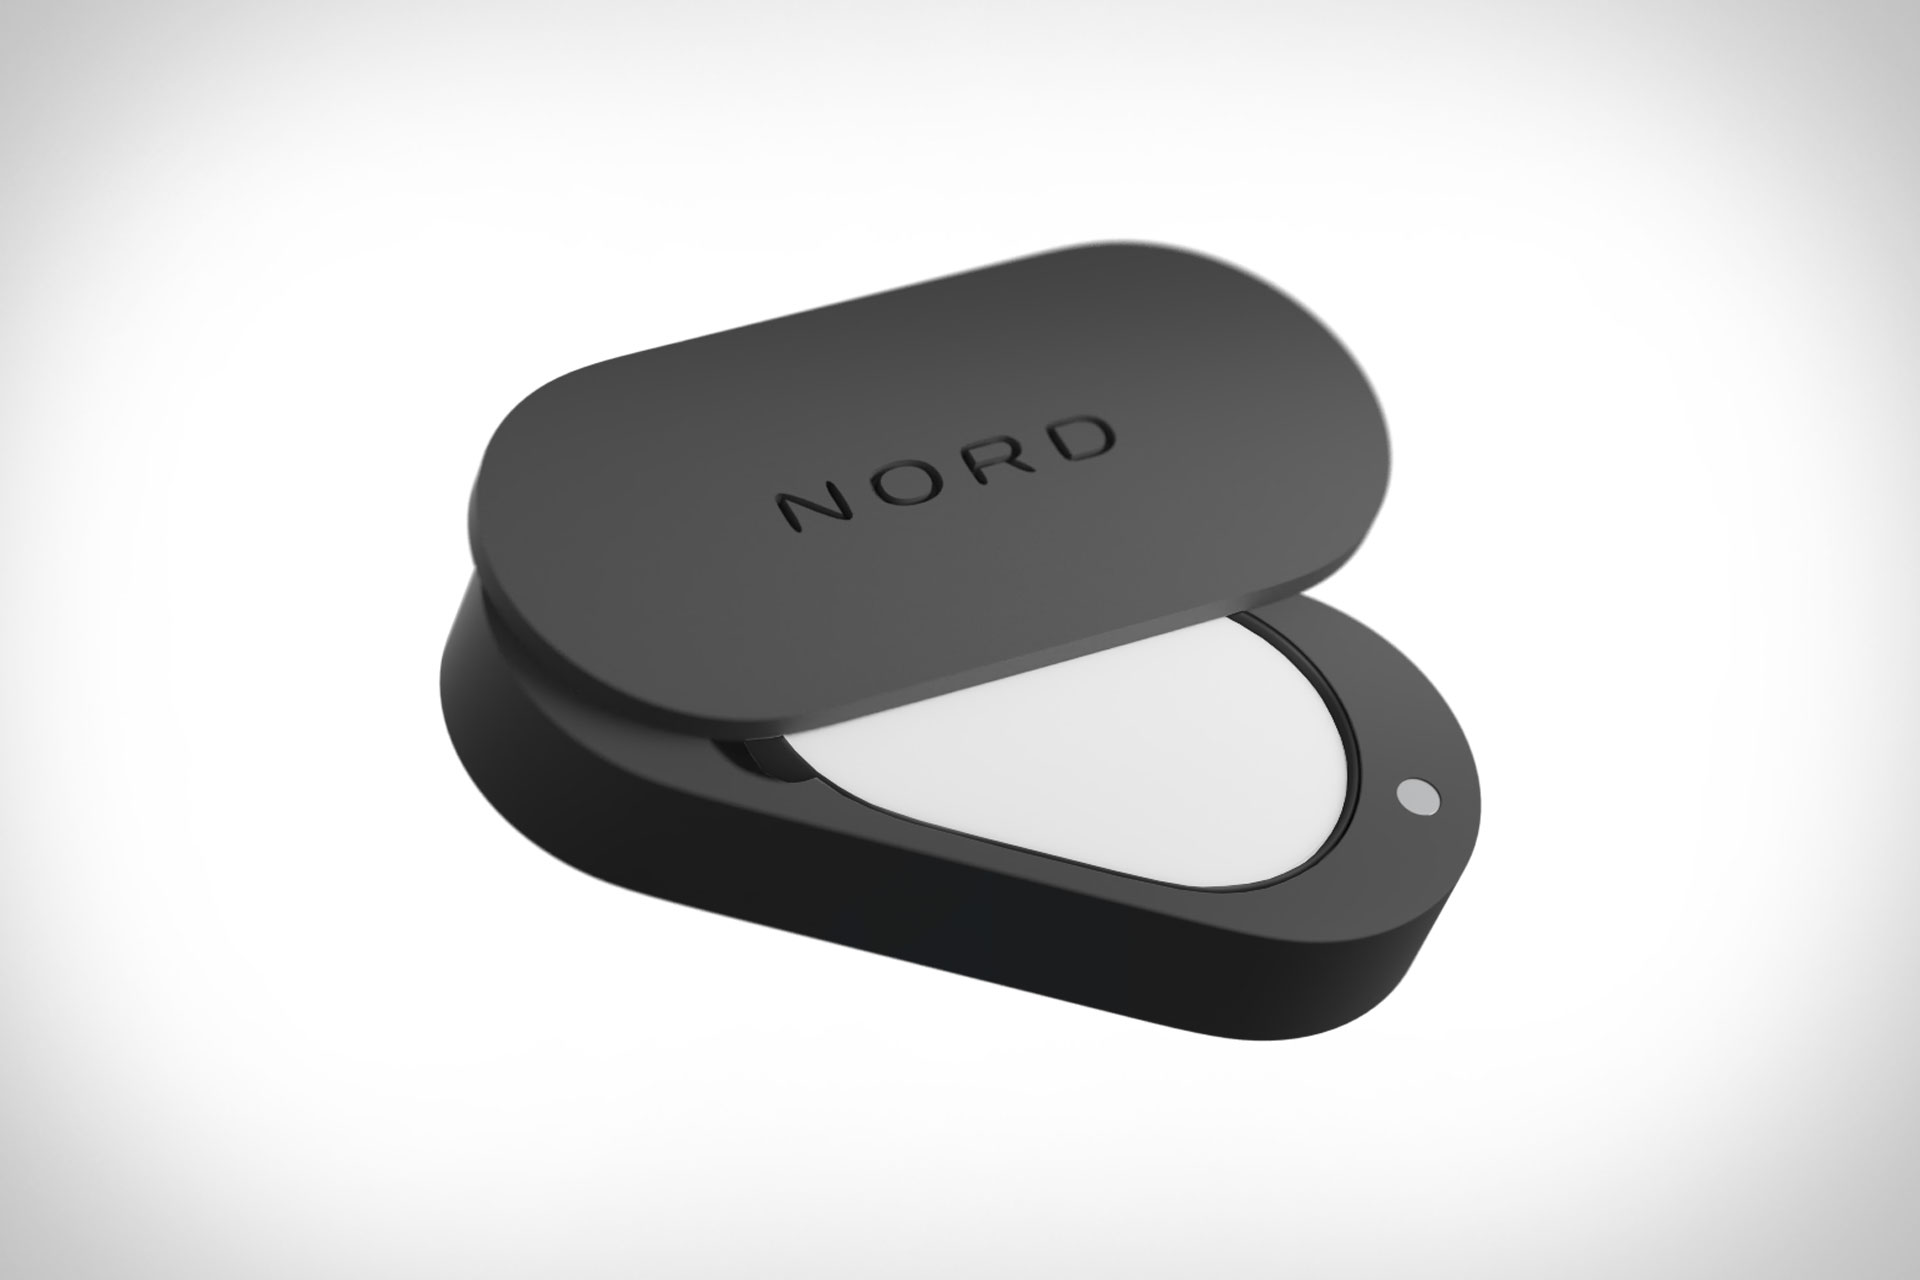 Nord Refillable Fragrance | Uncrate, #Nord #Refillable #Fragrance #Uncrate